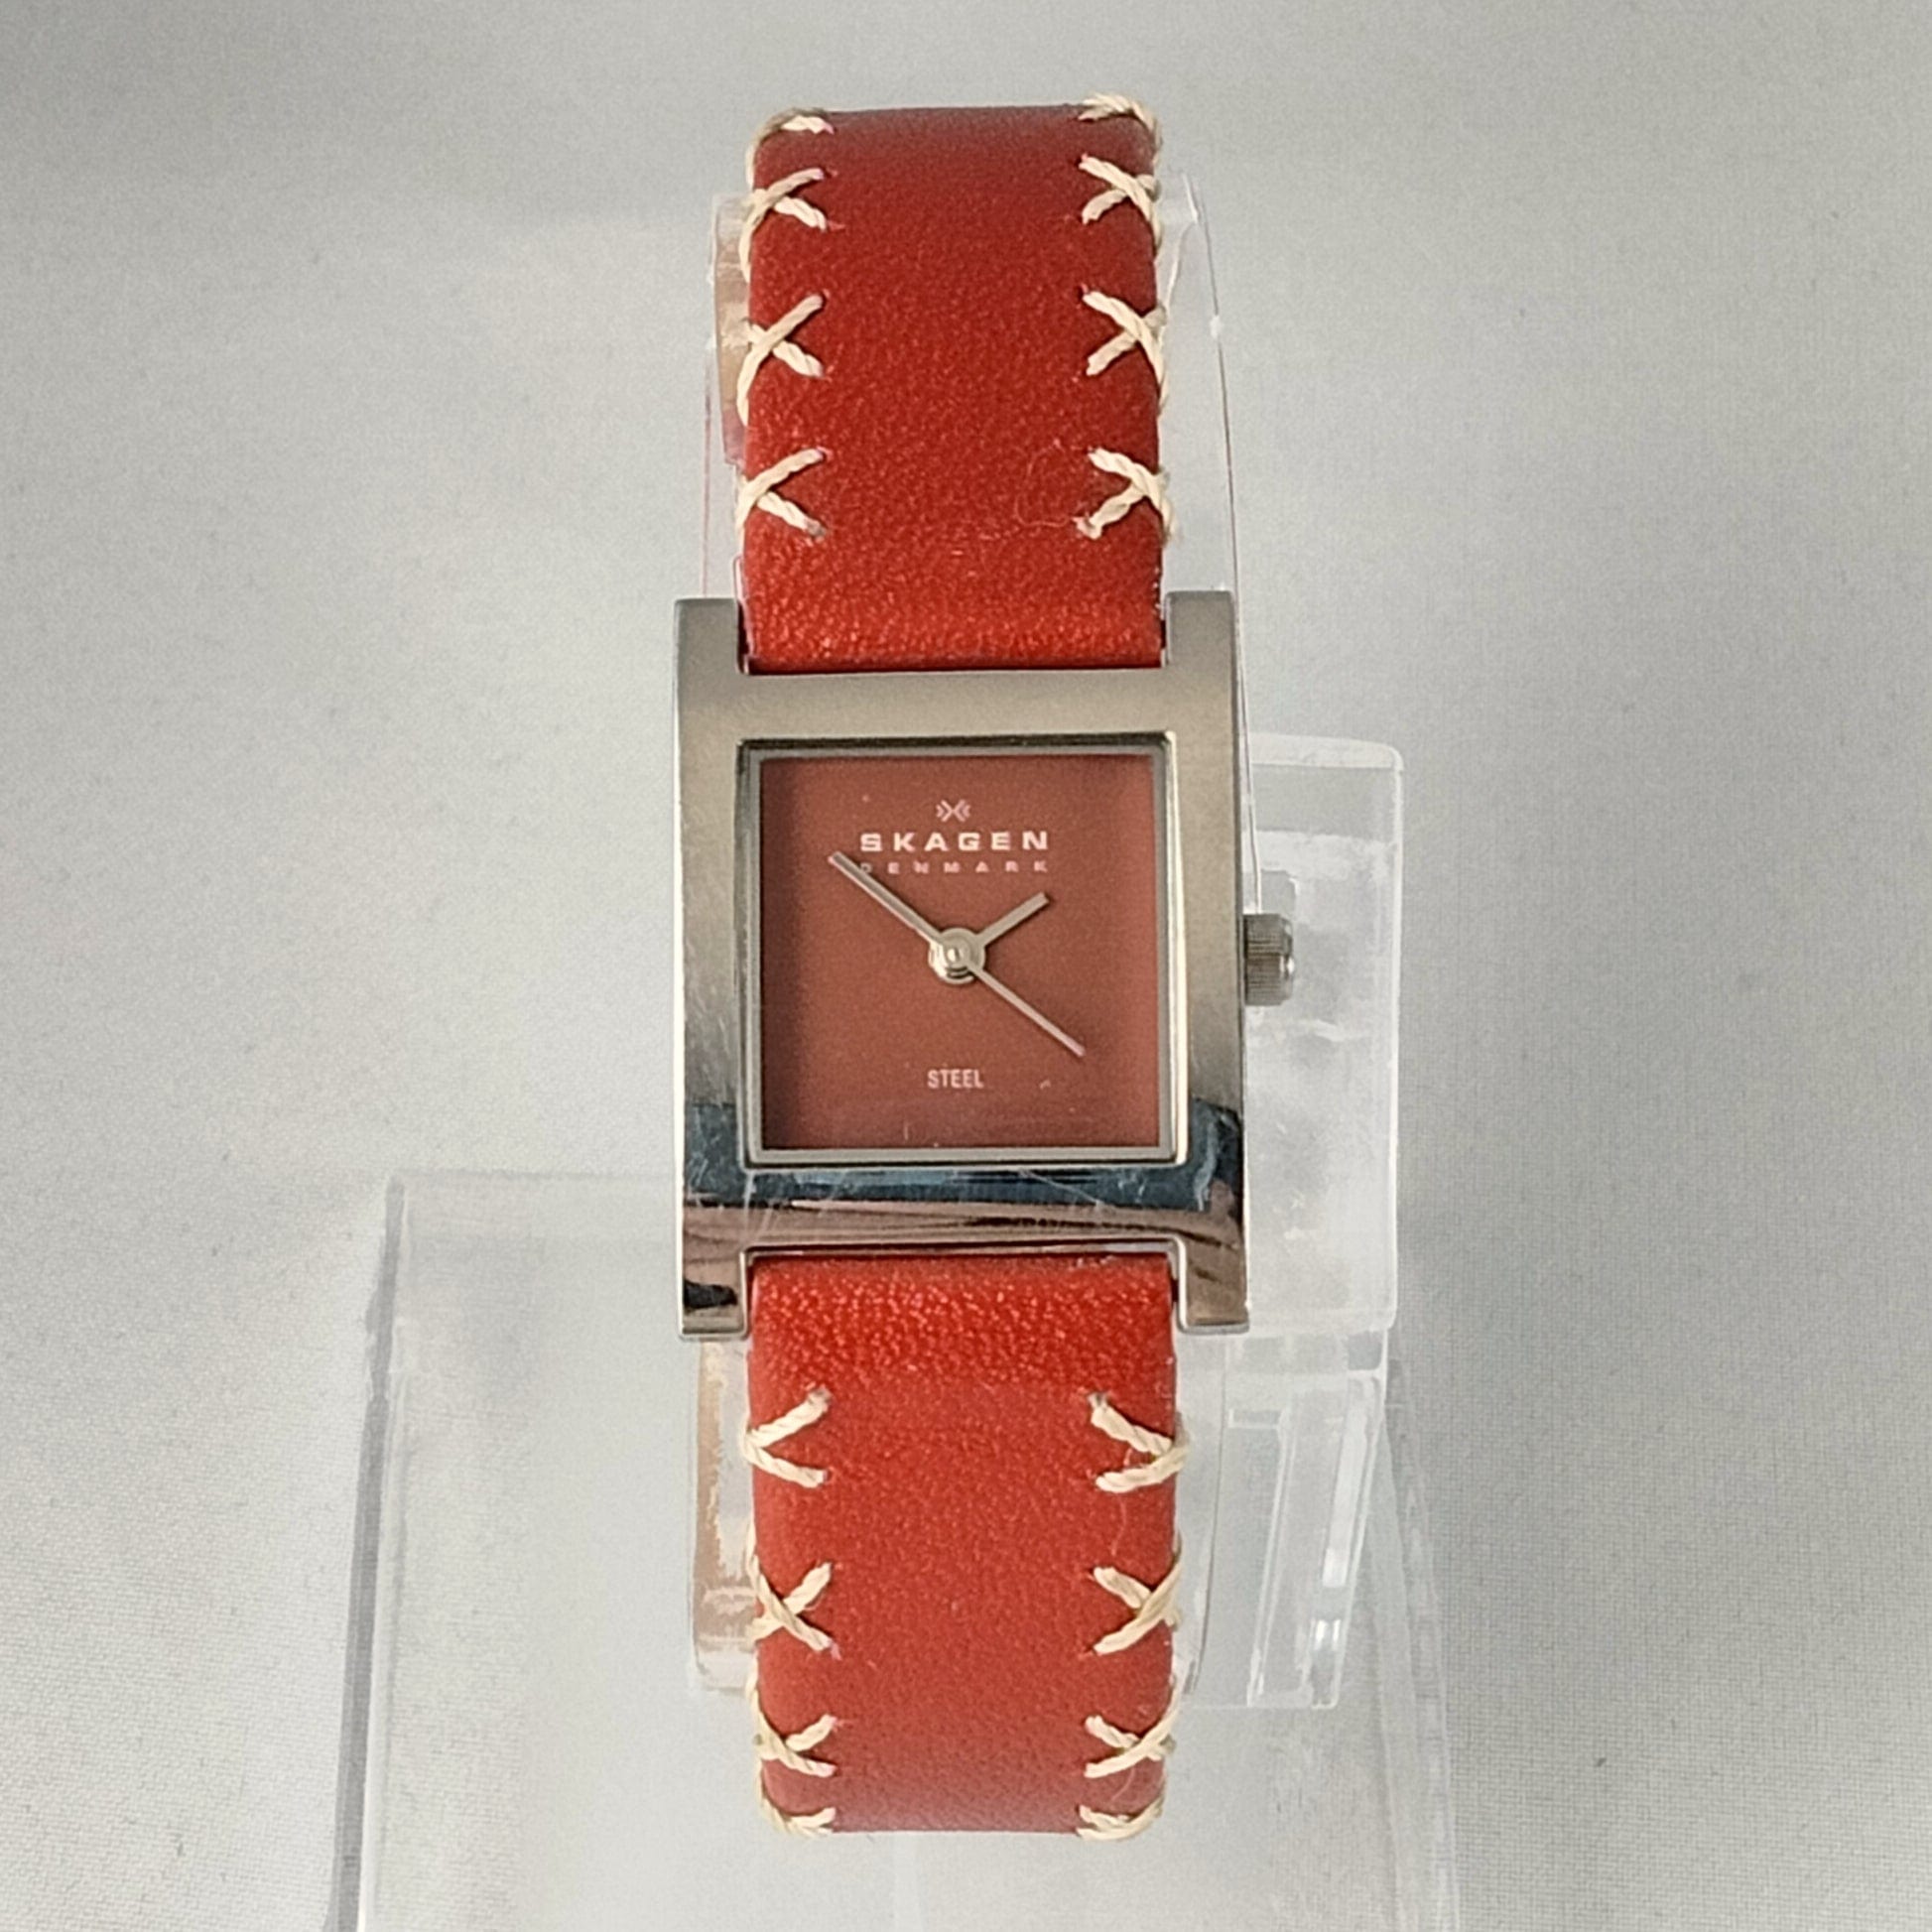 I Like Mikes Mid Century Modern Watches Skagen Women's Stainless Steel Watch, Red Dial, Red Leather Strap with White Stitching